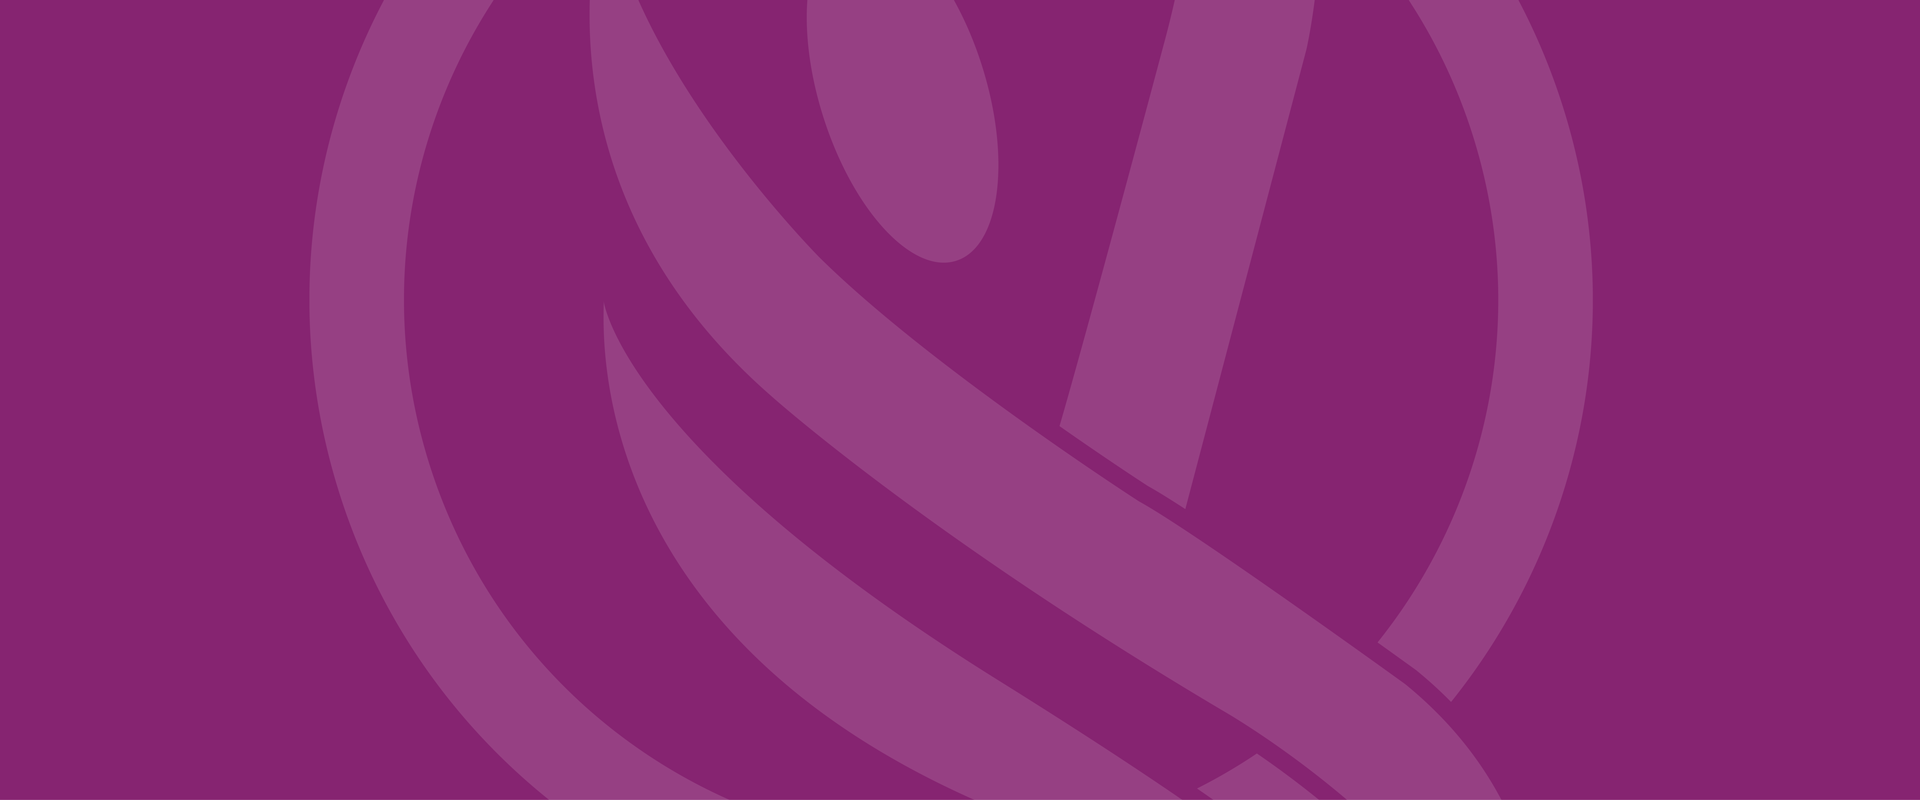 The icon of the Nevada Health center logo in purple on a purple background